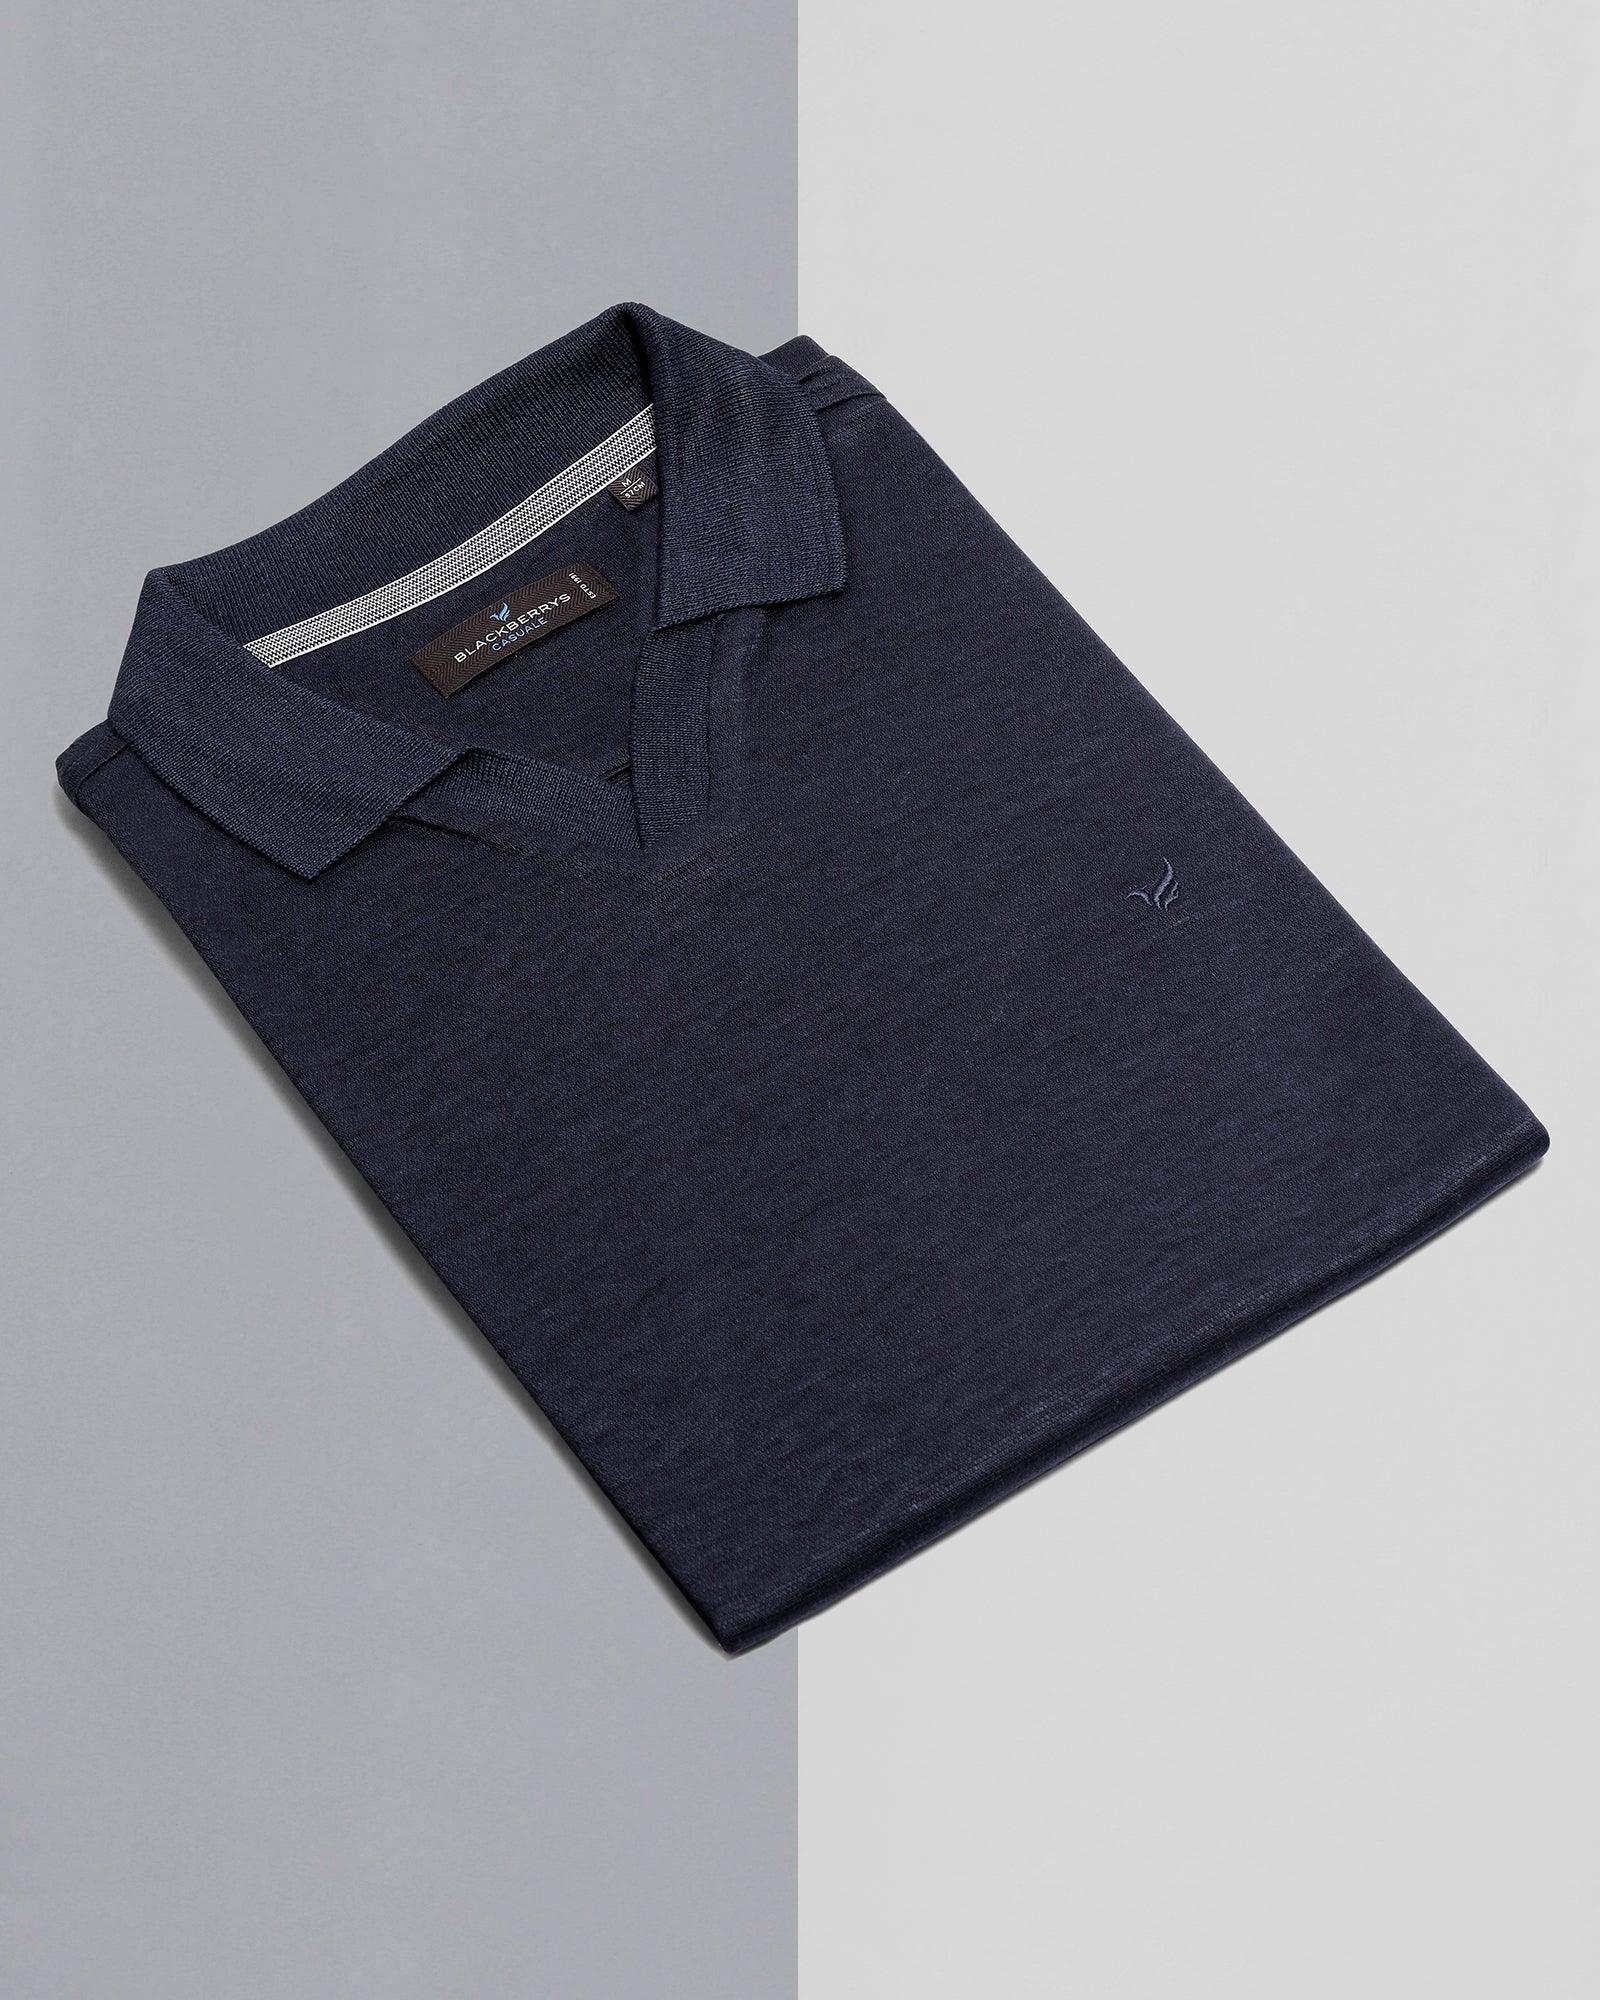 Linen Polo Navy Solid T Shirt - Sanor